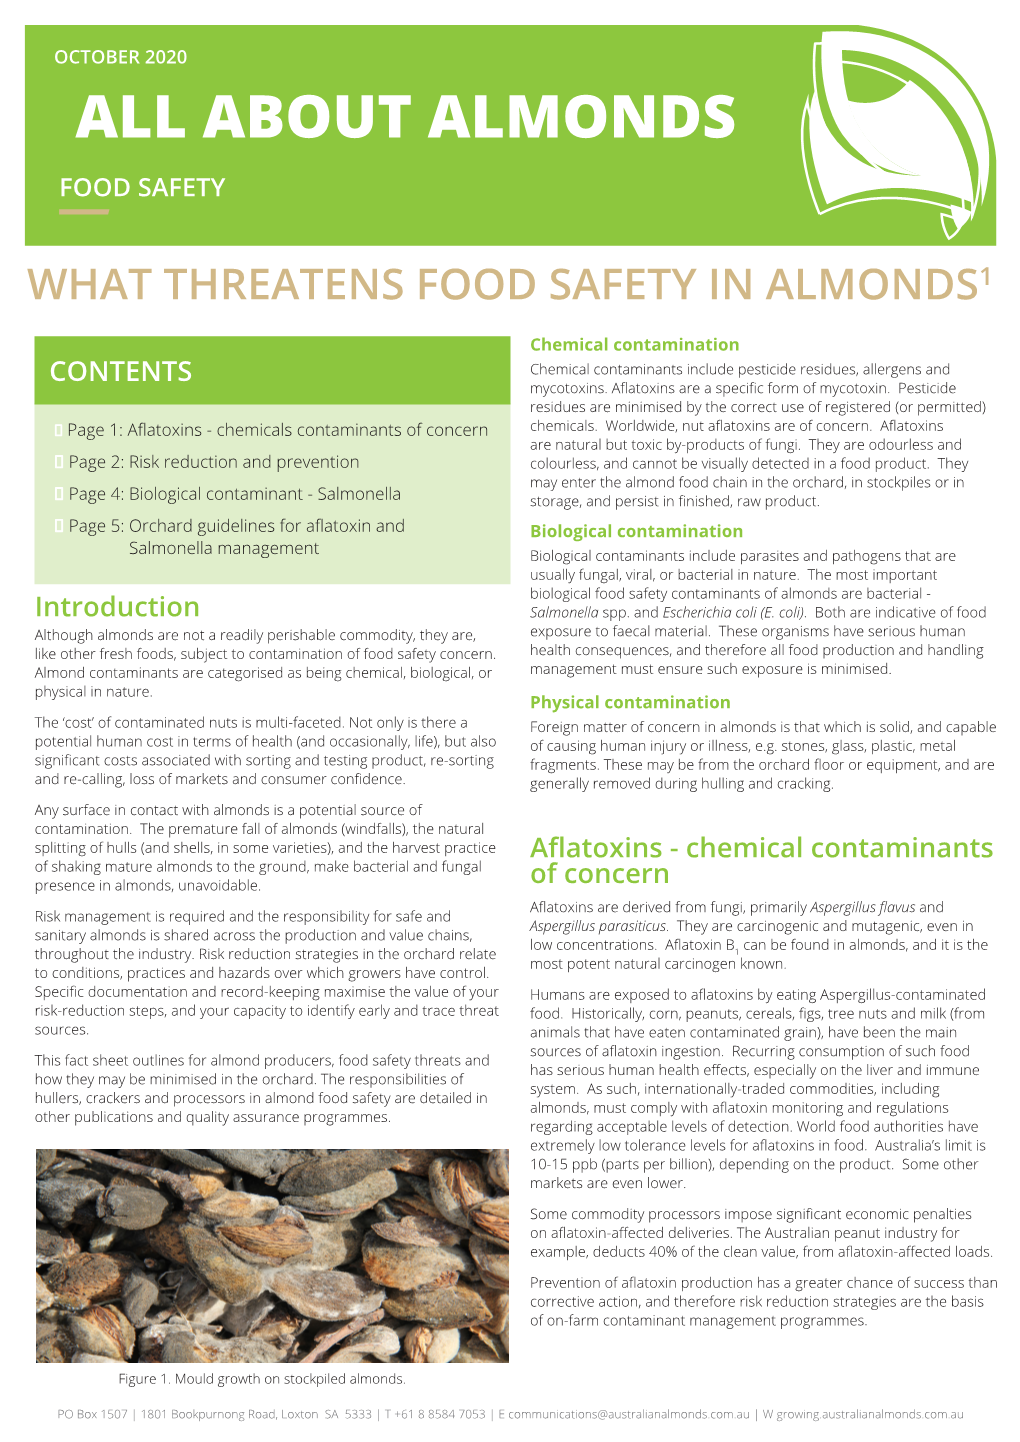 What Threatens the Safety of Almonds?